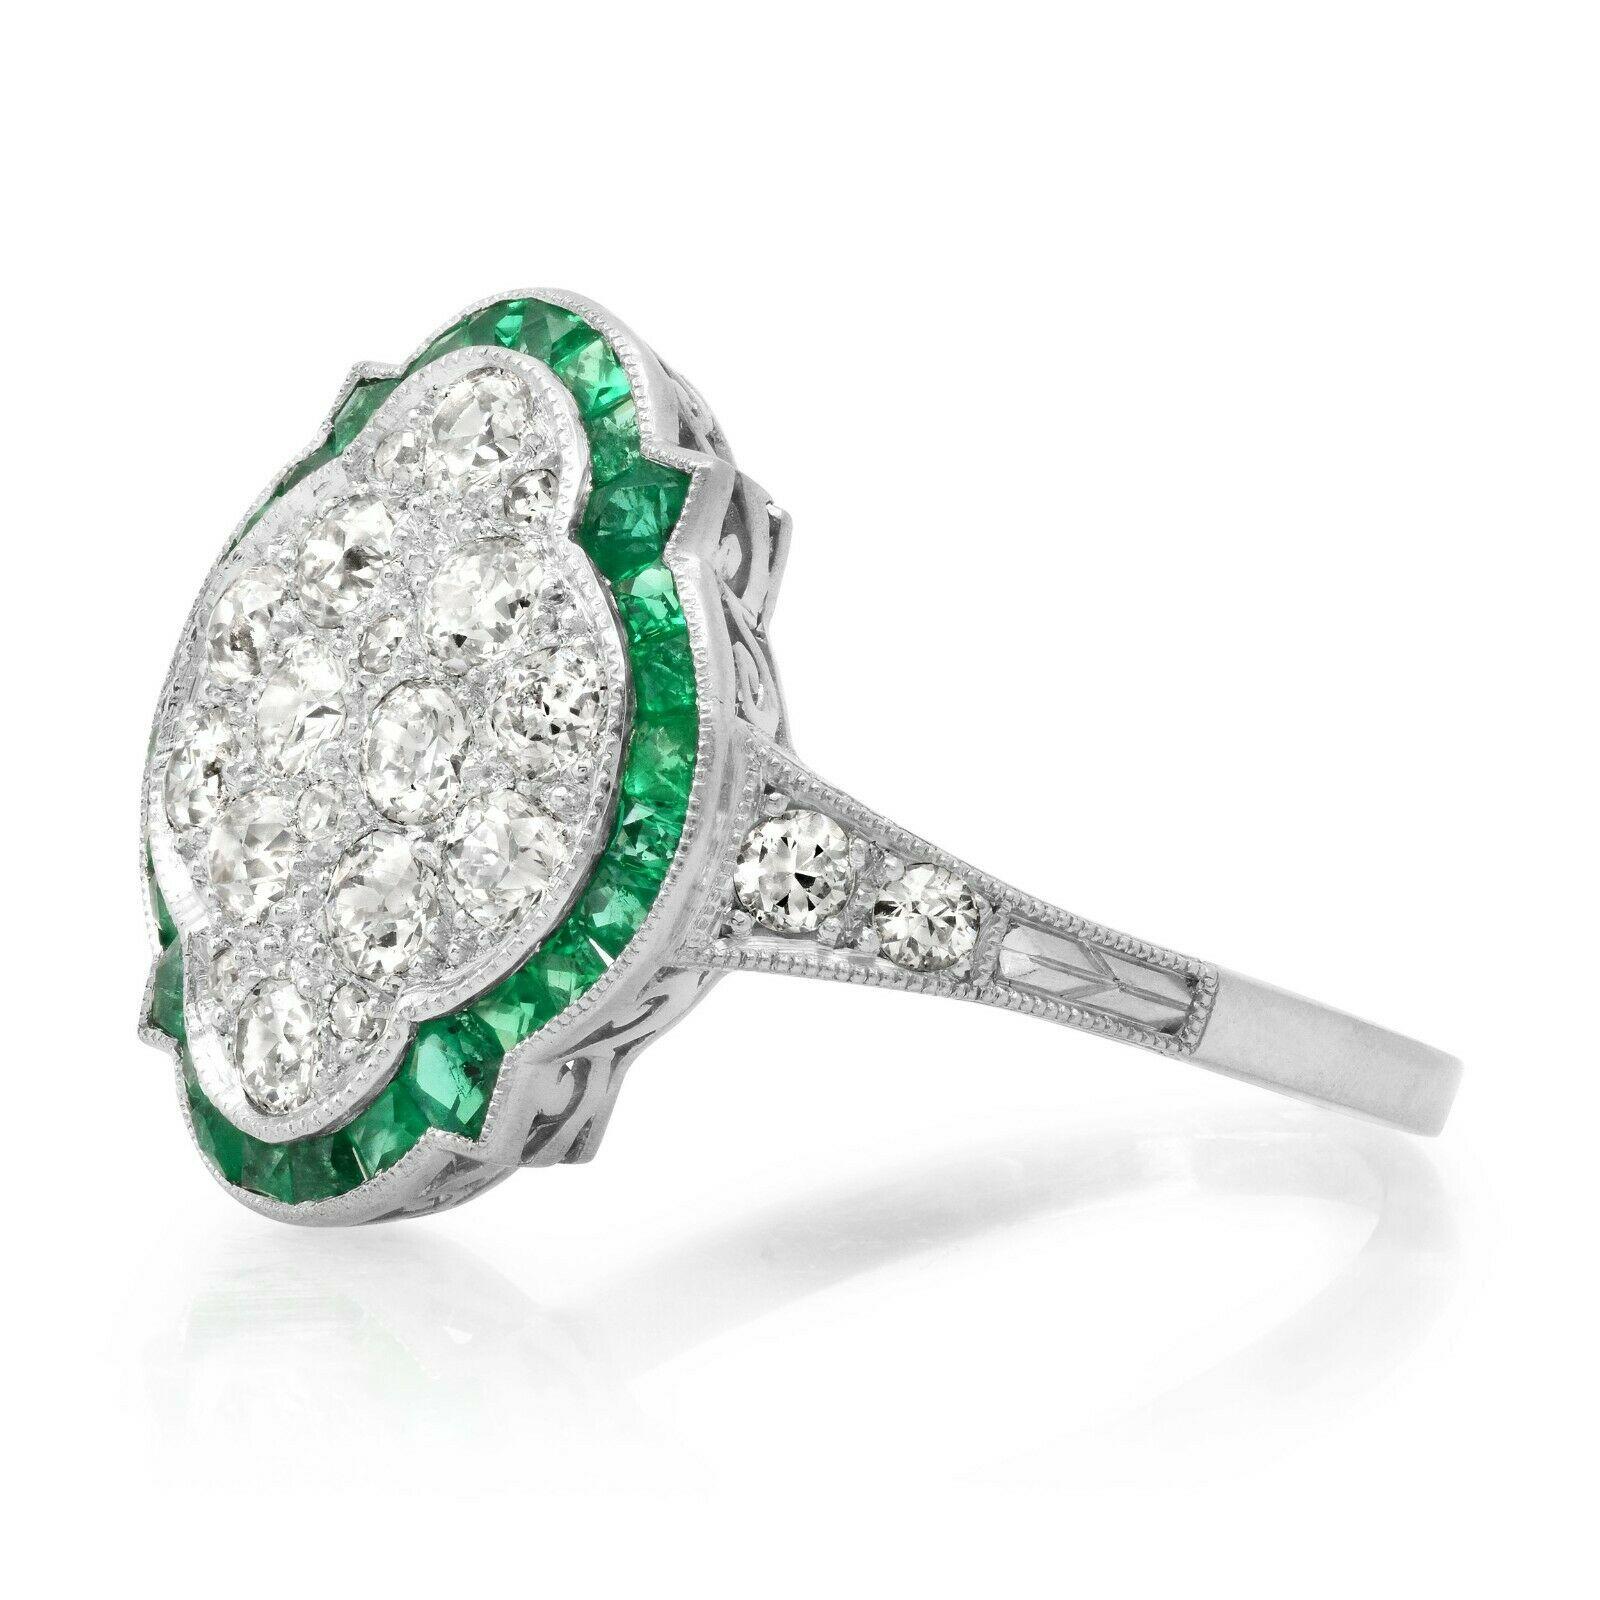 Diamond (0.82 total carat weight) and emerald (0.35 total carat weight) antique inspired cocktail ring in 900 platinum. The ring is designed and handmade locally in Los Angeles by Sage Designs L.A. using earth-mined and conflict free diamonds and